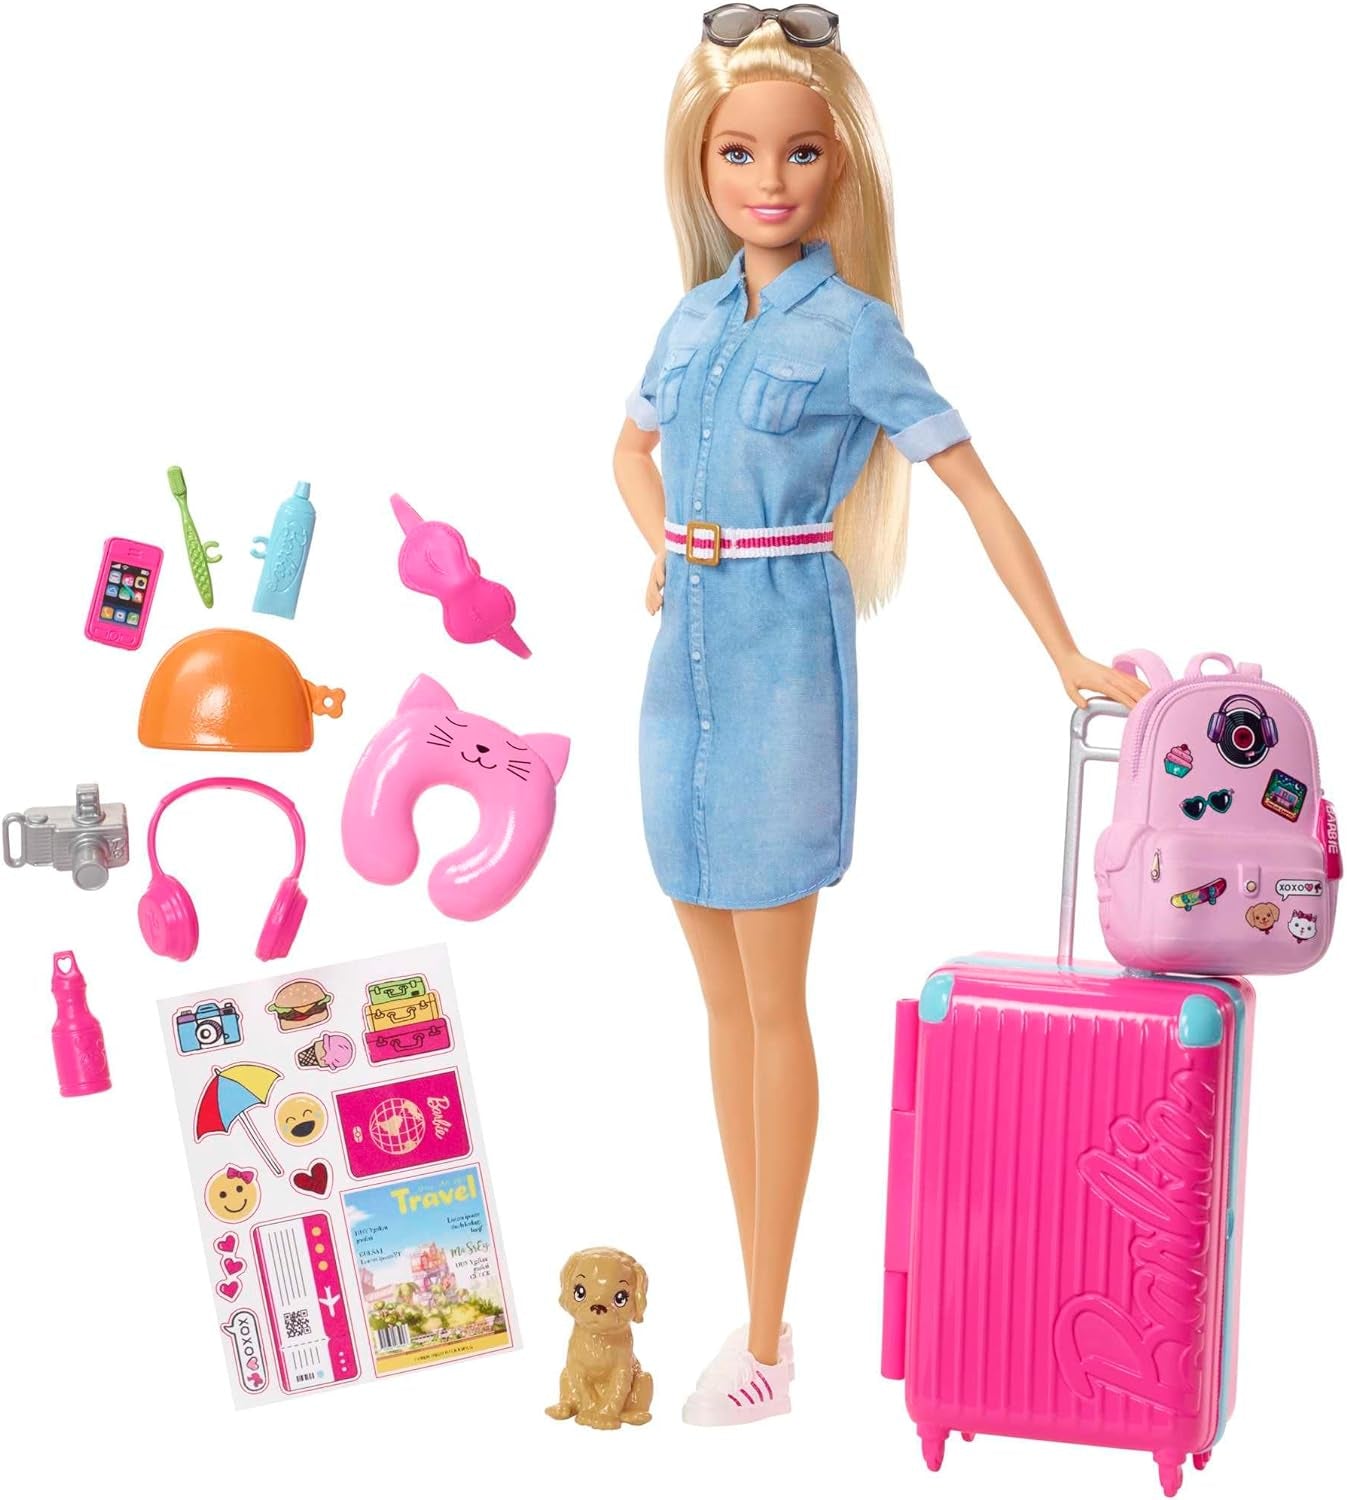 ​ Travel Doll, Blonde, with Puppy, Opening Suitcase, Stickers and 10+ Accessories, for 3 to 7 Year Olds, FWV25